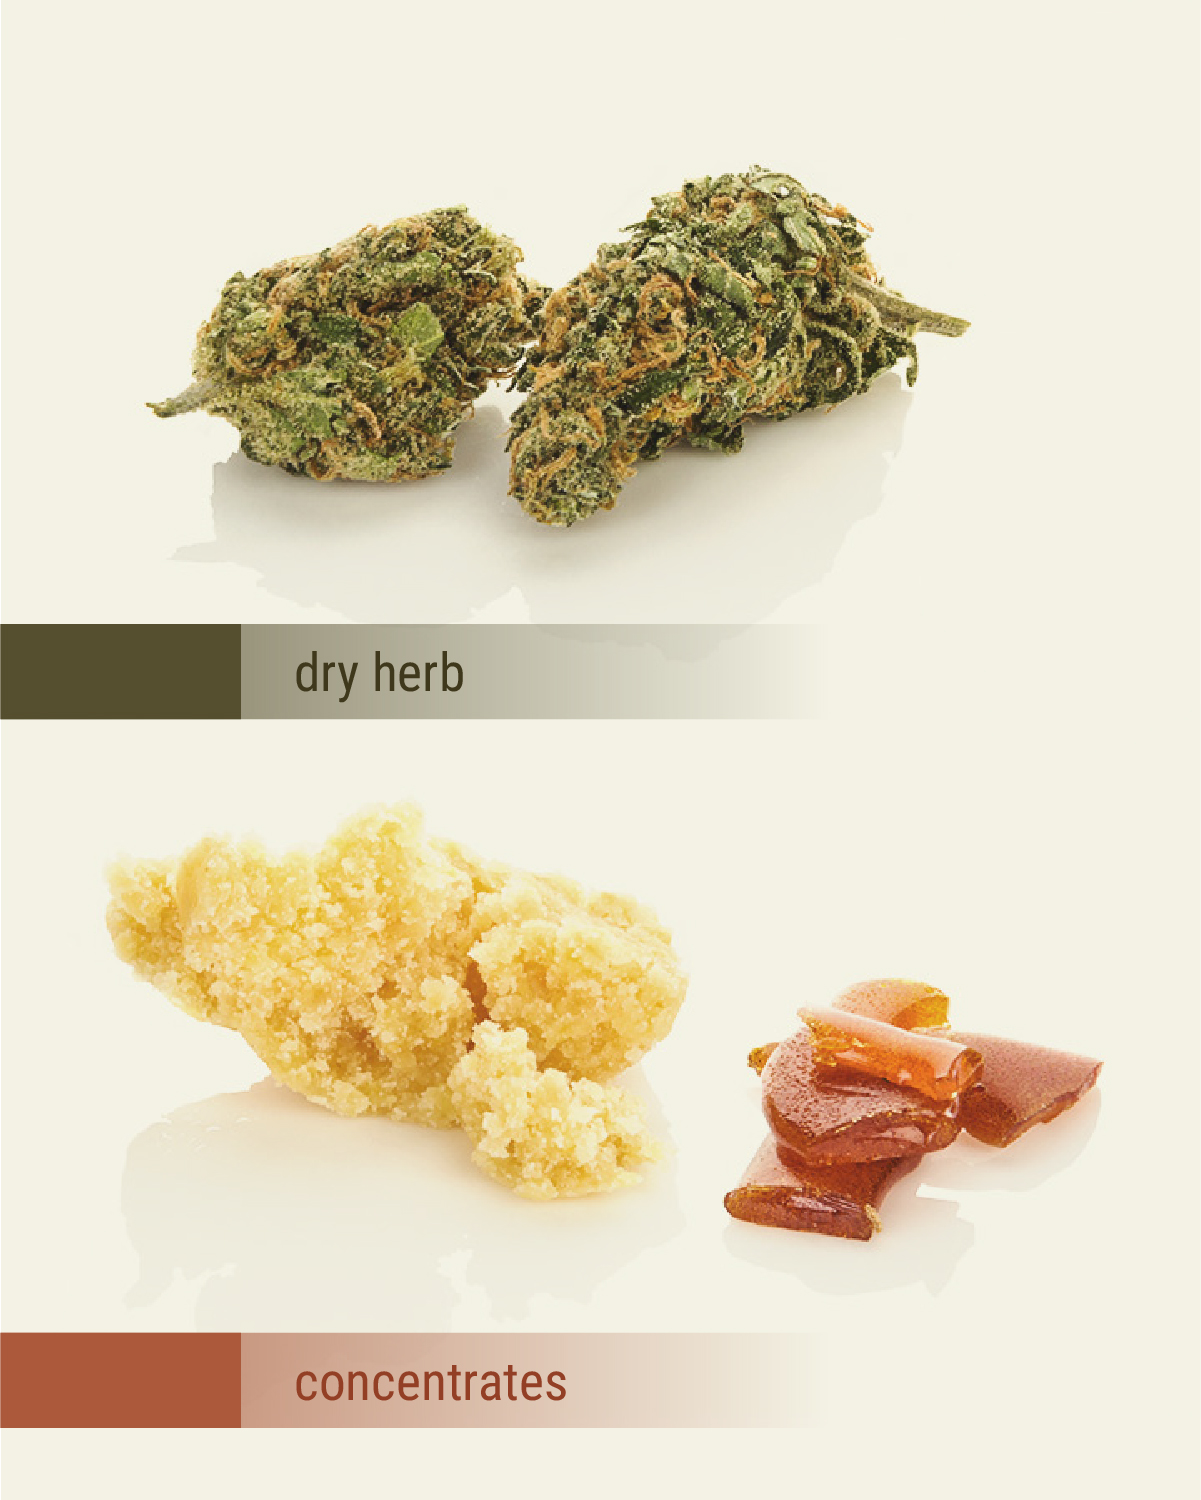 Herb vs Concentrate